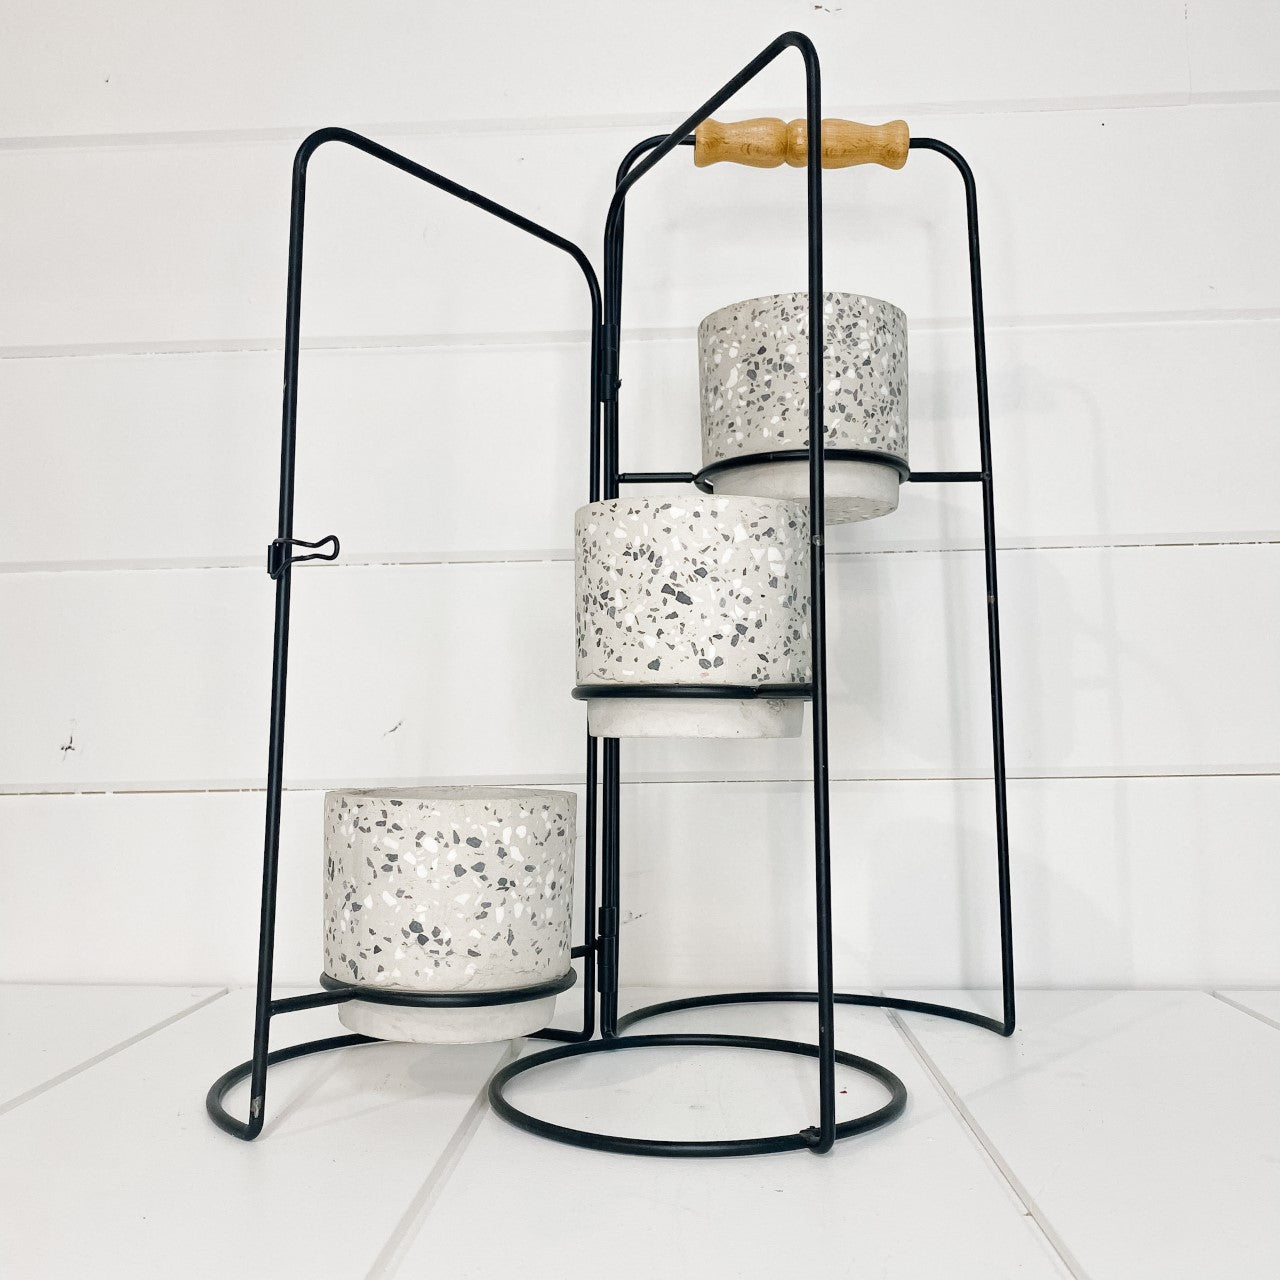 Plant stand with cement speckled pots.